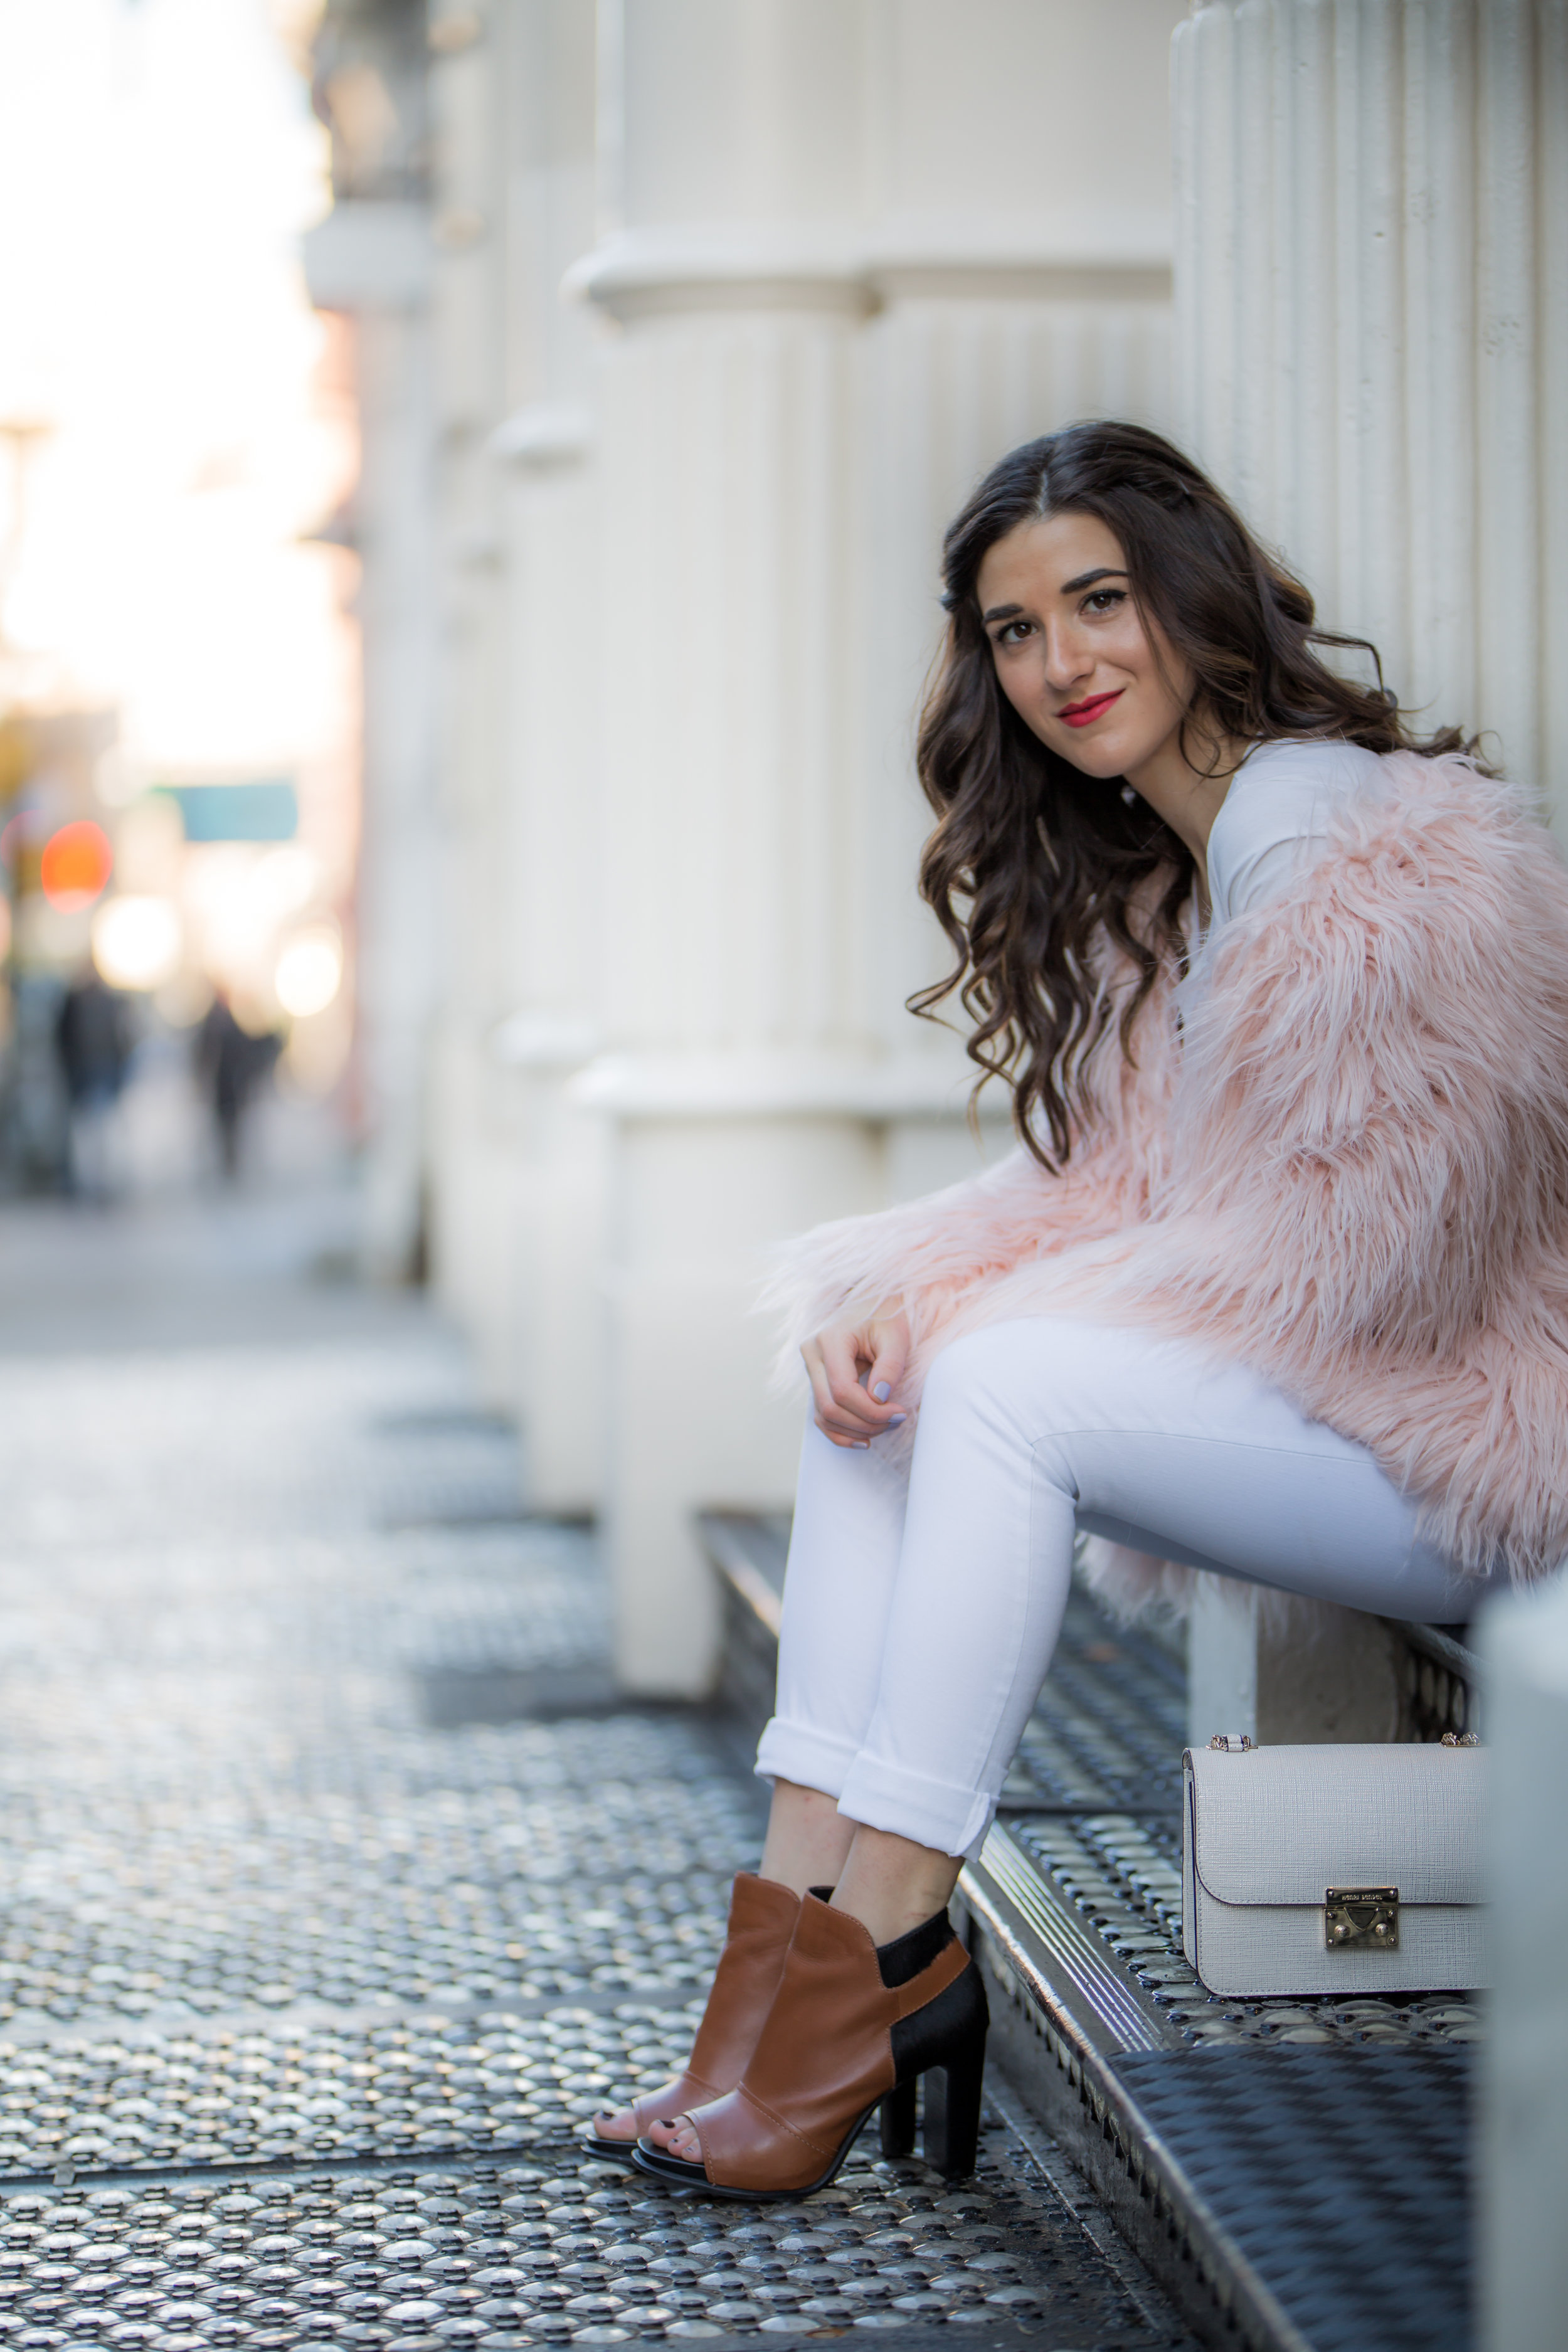 Pink Faux Fur Jacket White Jeans The Best Career Advice Esther Santer Fashion Blog NYC Street Style Blogger Outfit OOTD Trendy Winter Whites Henri Bendel Bag Tan Booties Girl Women Shop Sale Hair Shoes Wearing What To Wear Model Accessories Photoshoot.jpg